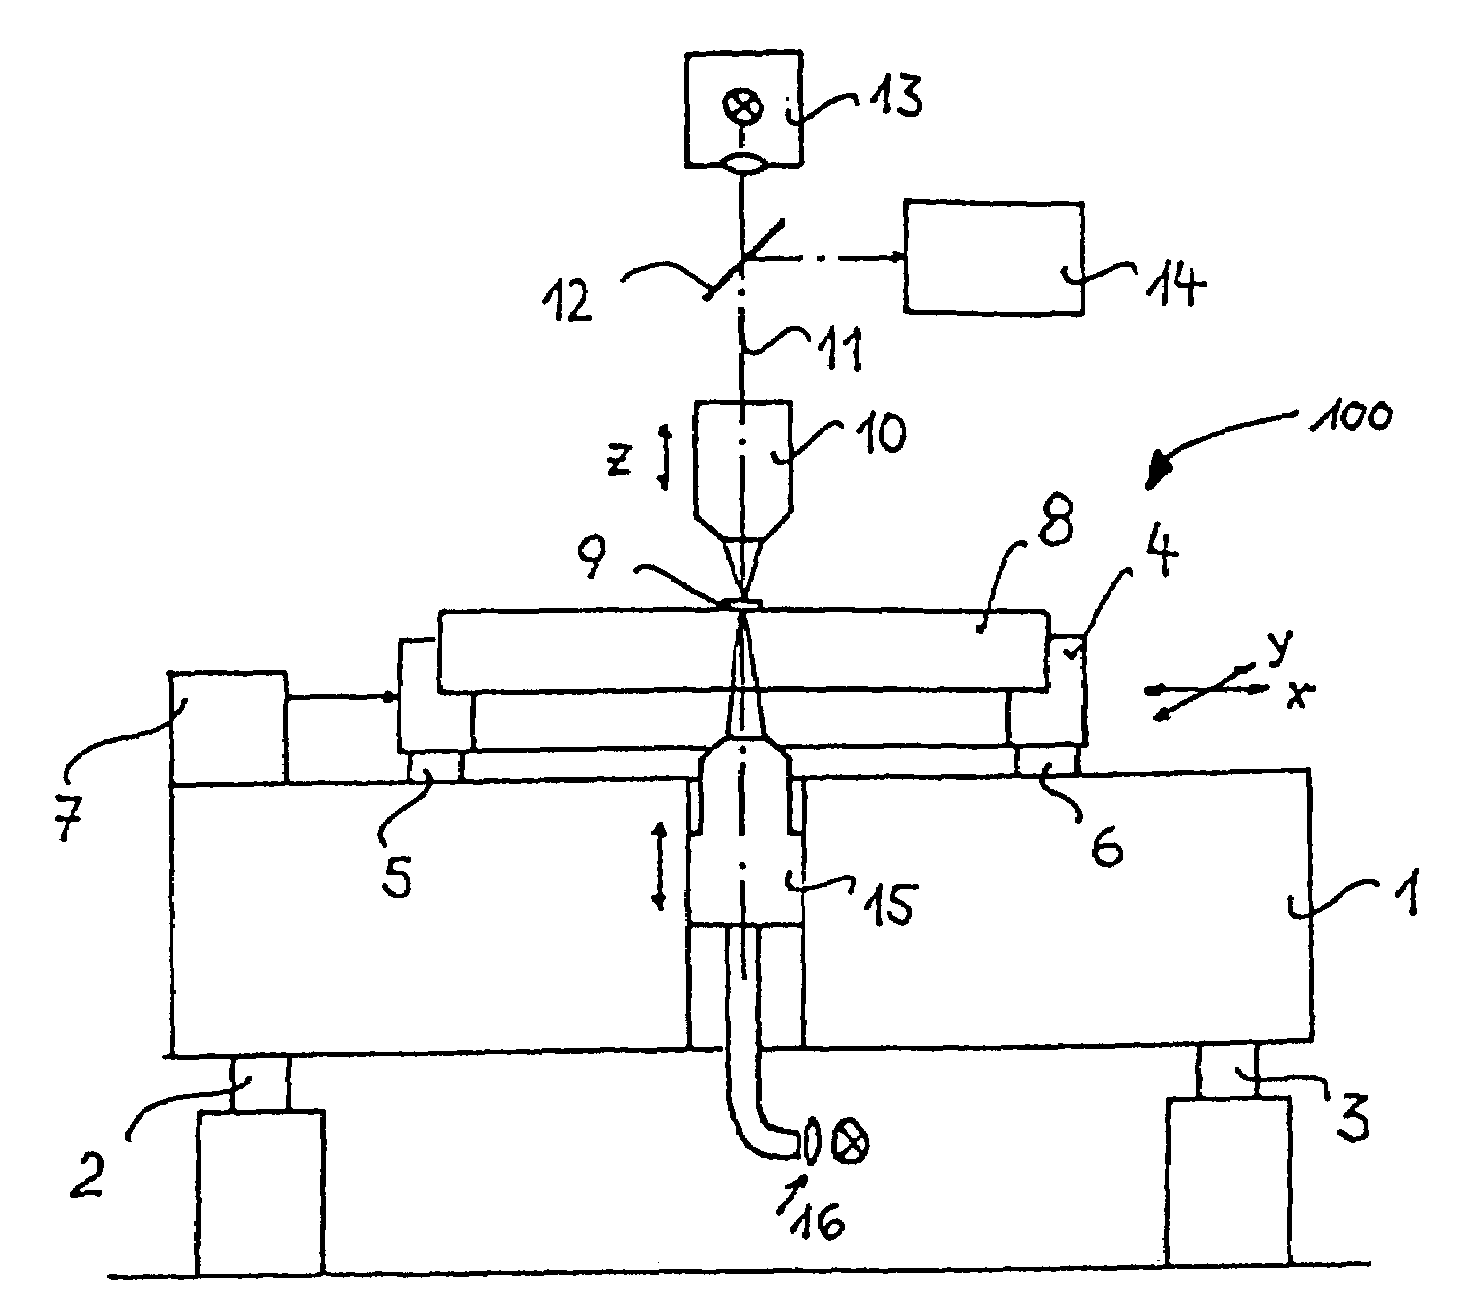 Substrate holder, and use of the substrate holder in a highly accurate measuring instrument